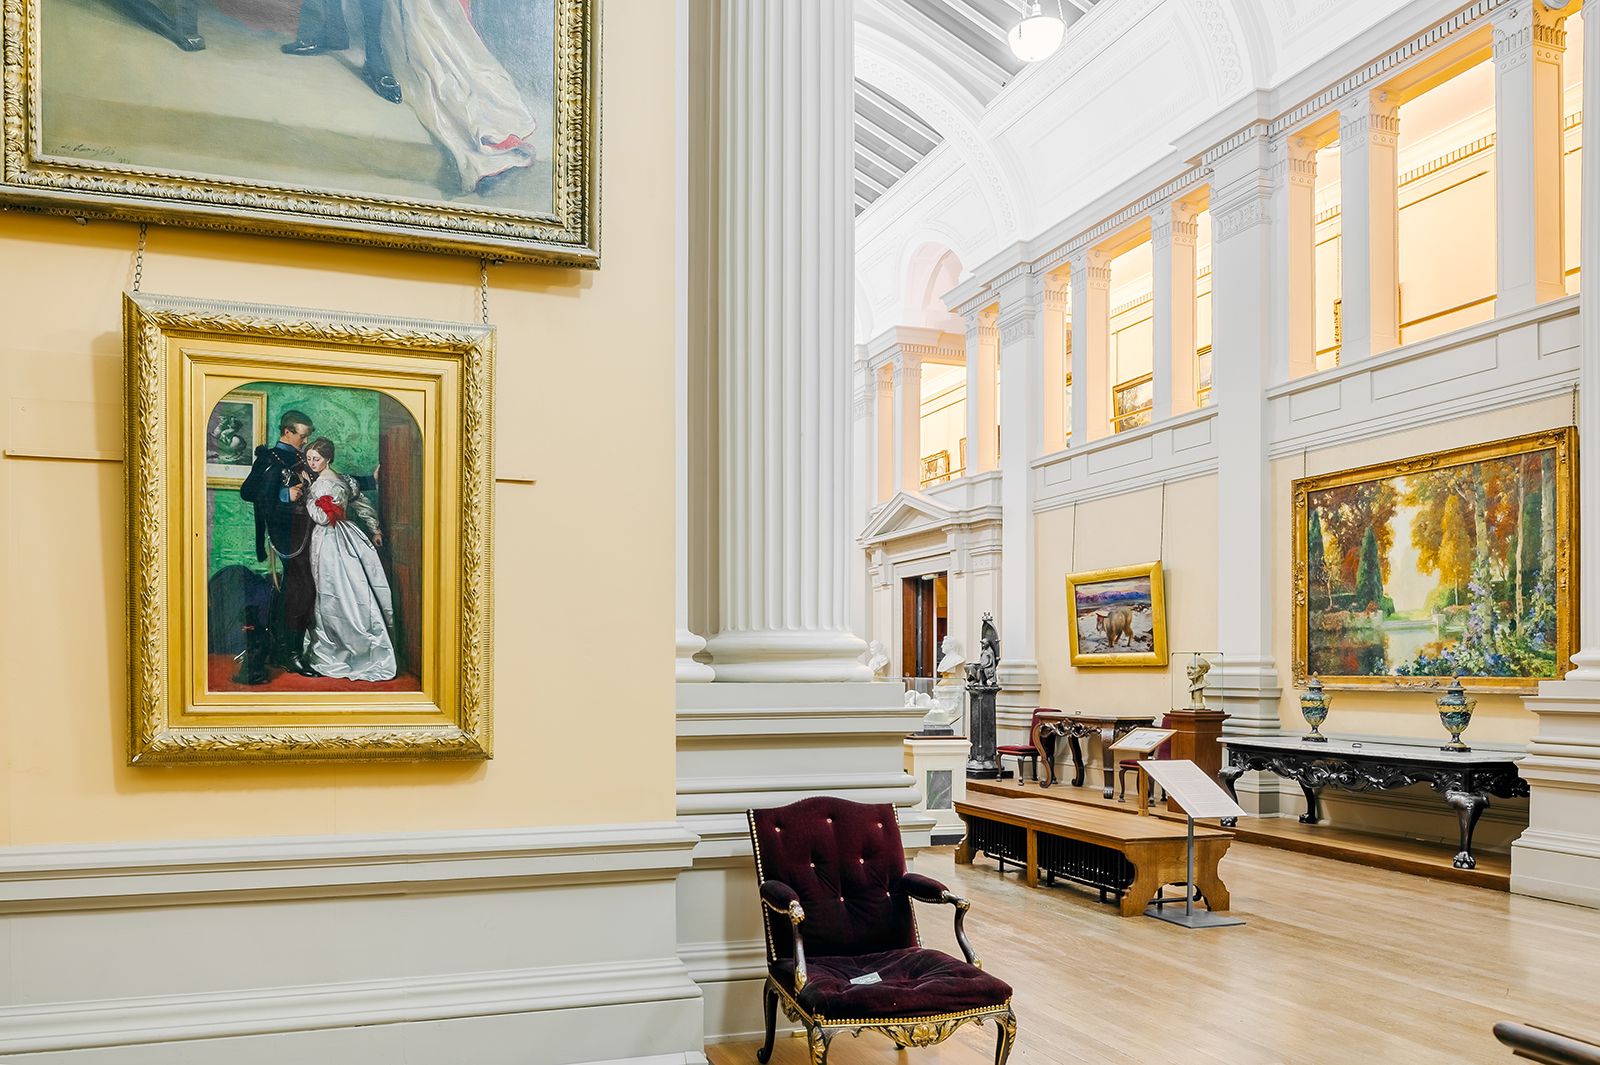 Image of the Lady Lever Gallery interior